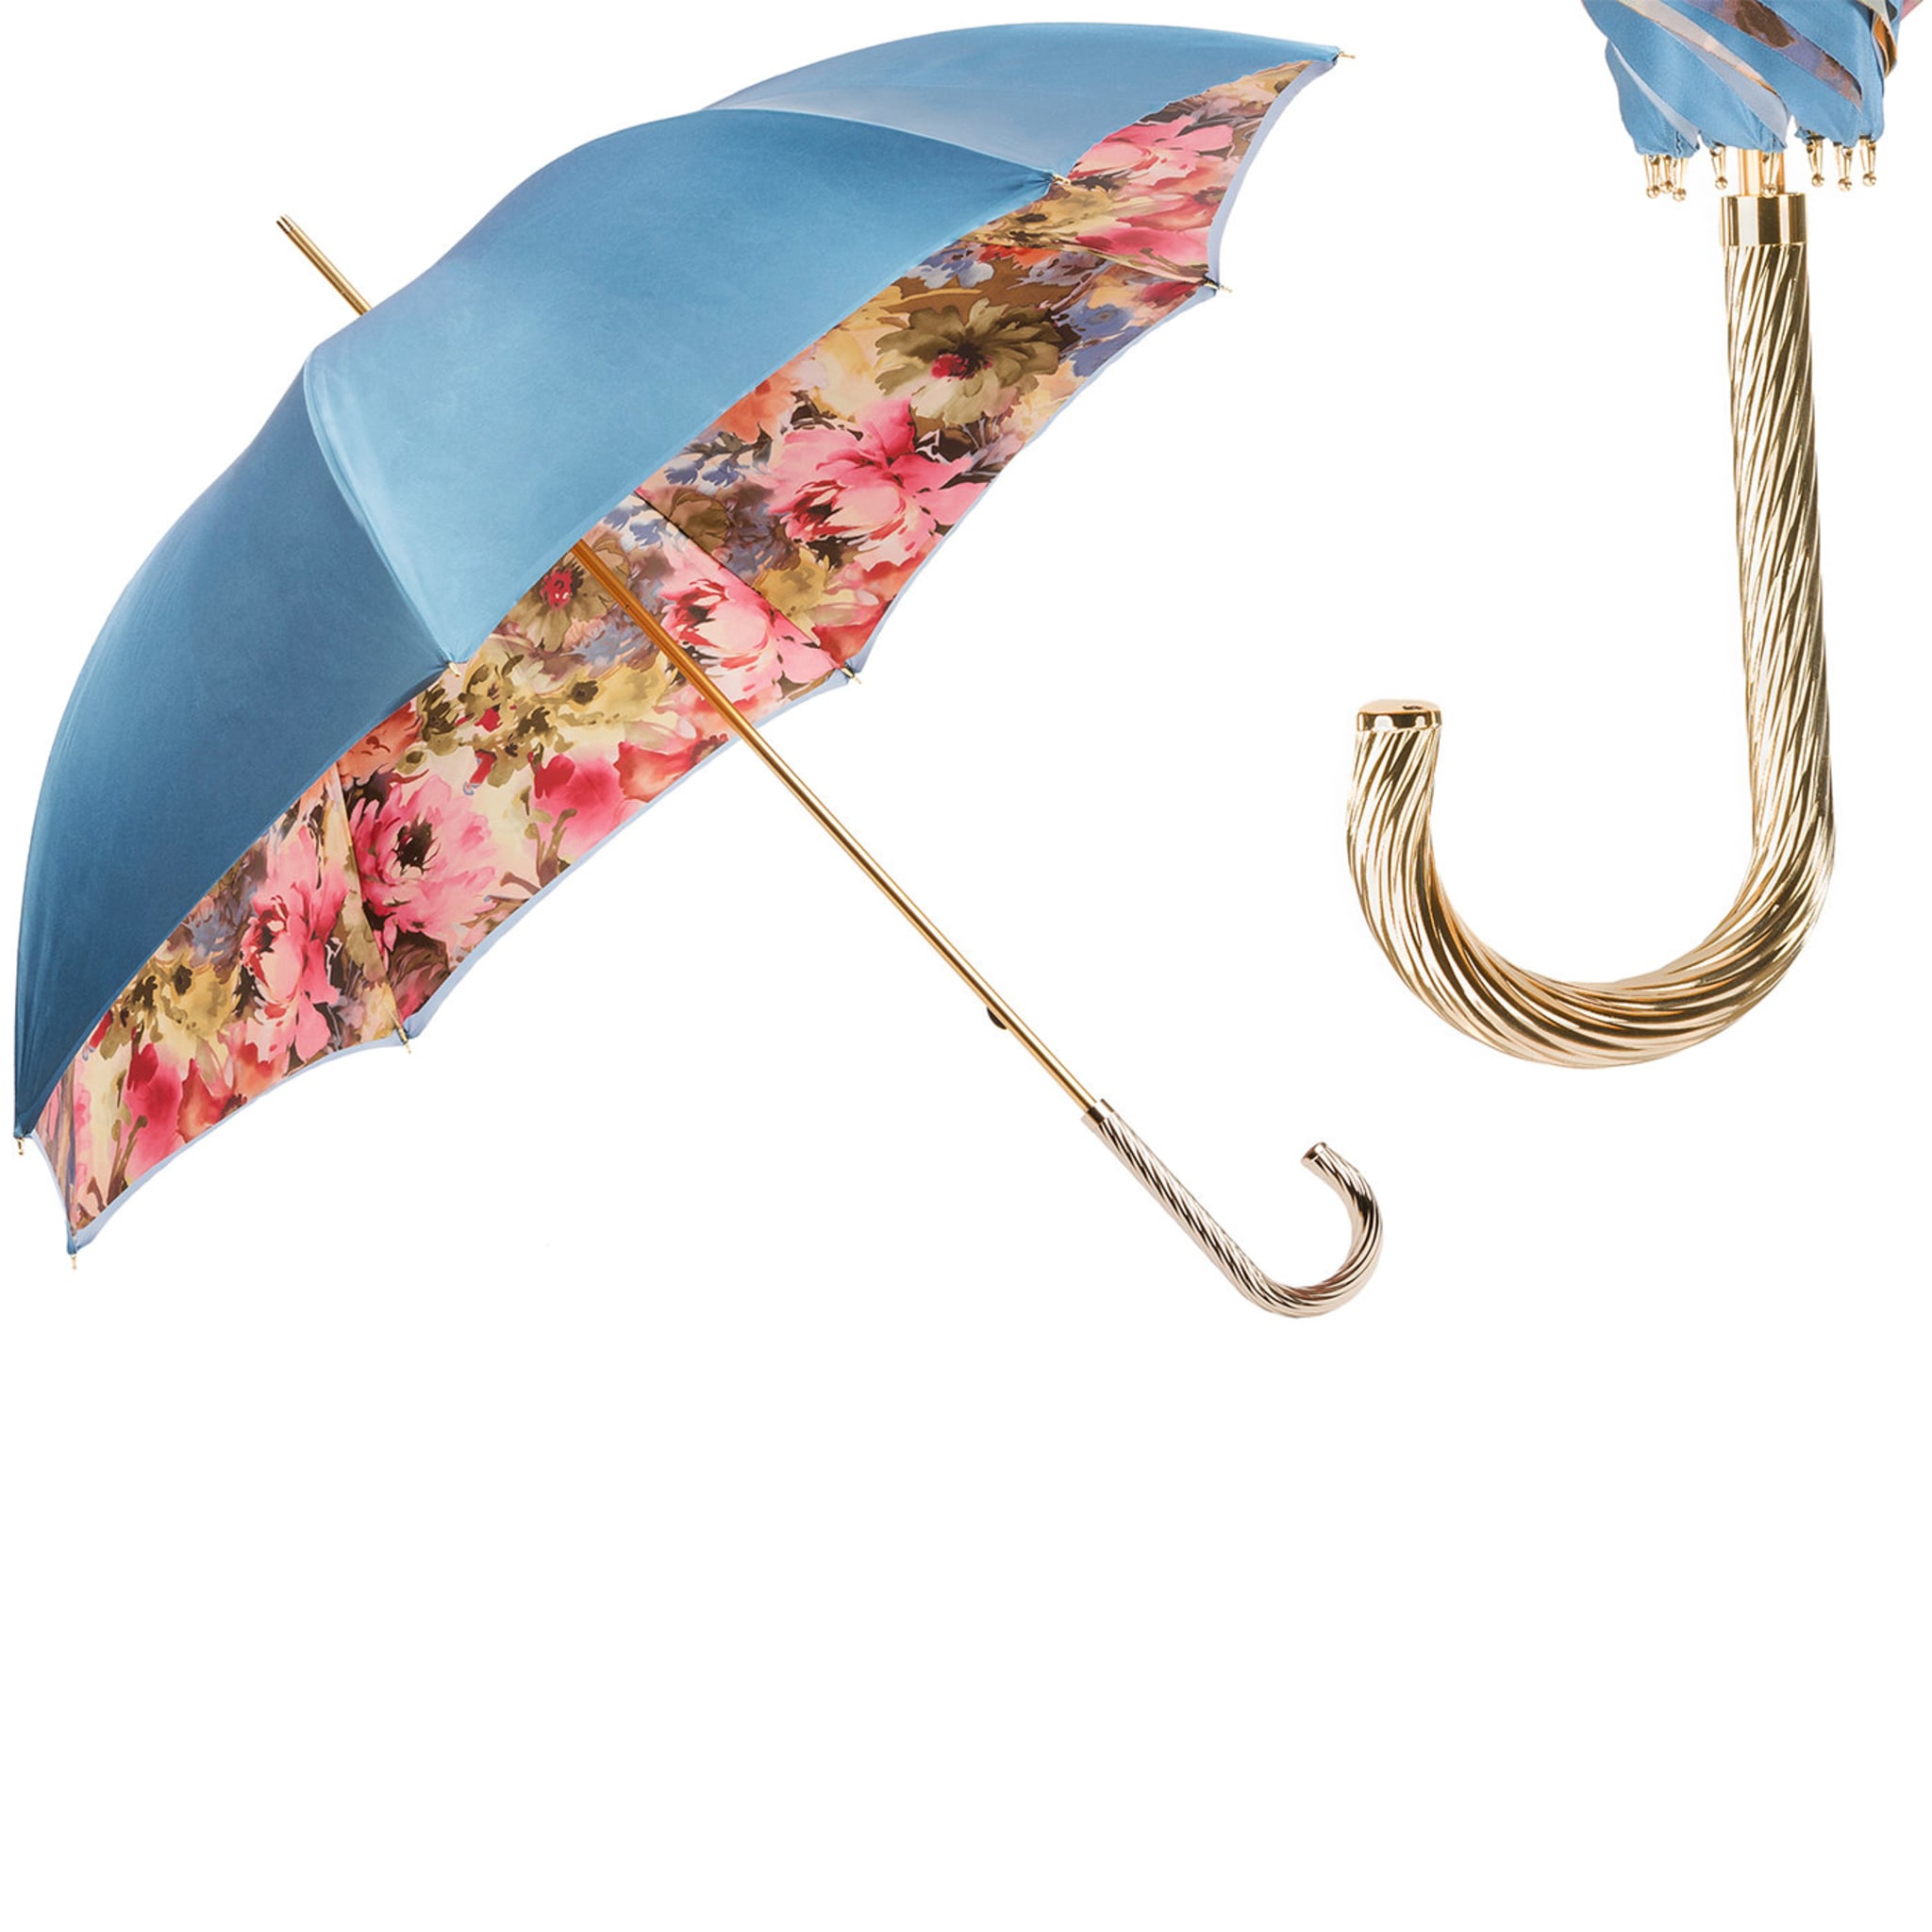 Umbrella with Flowers Inside - Double Cloth - Alternative view 1